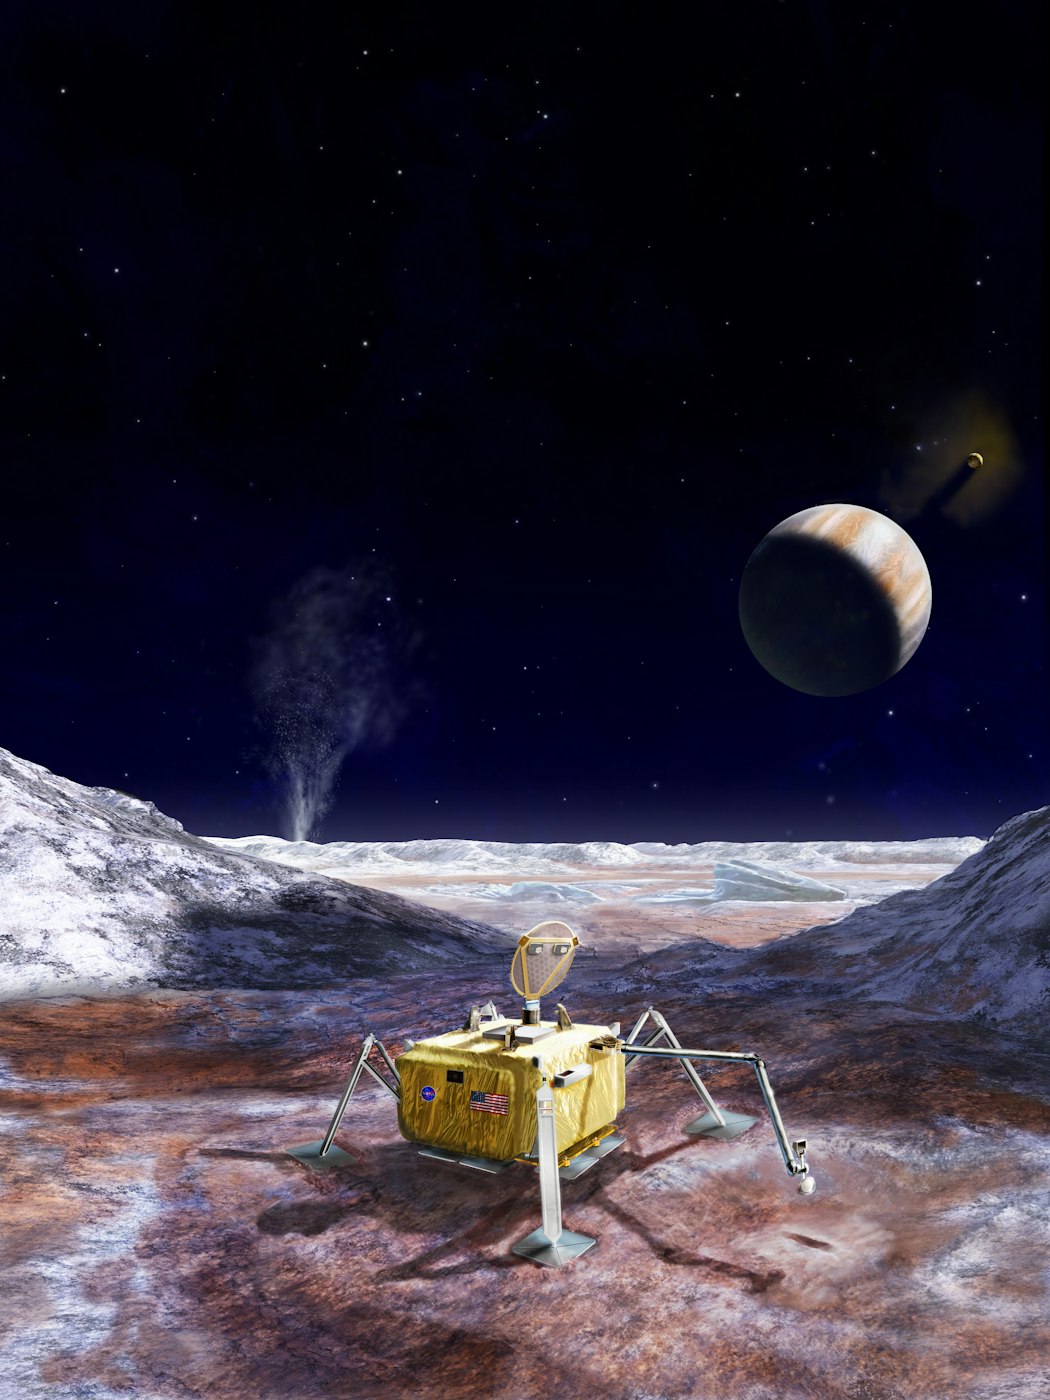 An artist's rendering shows the design for a possible future landing mission to Europa. The lander features a sampling arm to collect samples from the moon's surface.